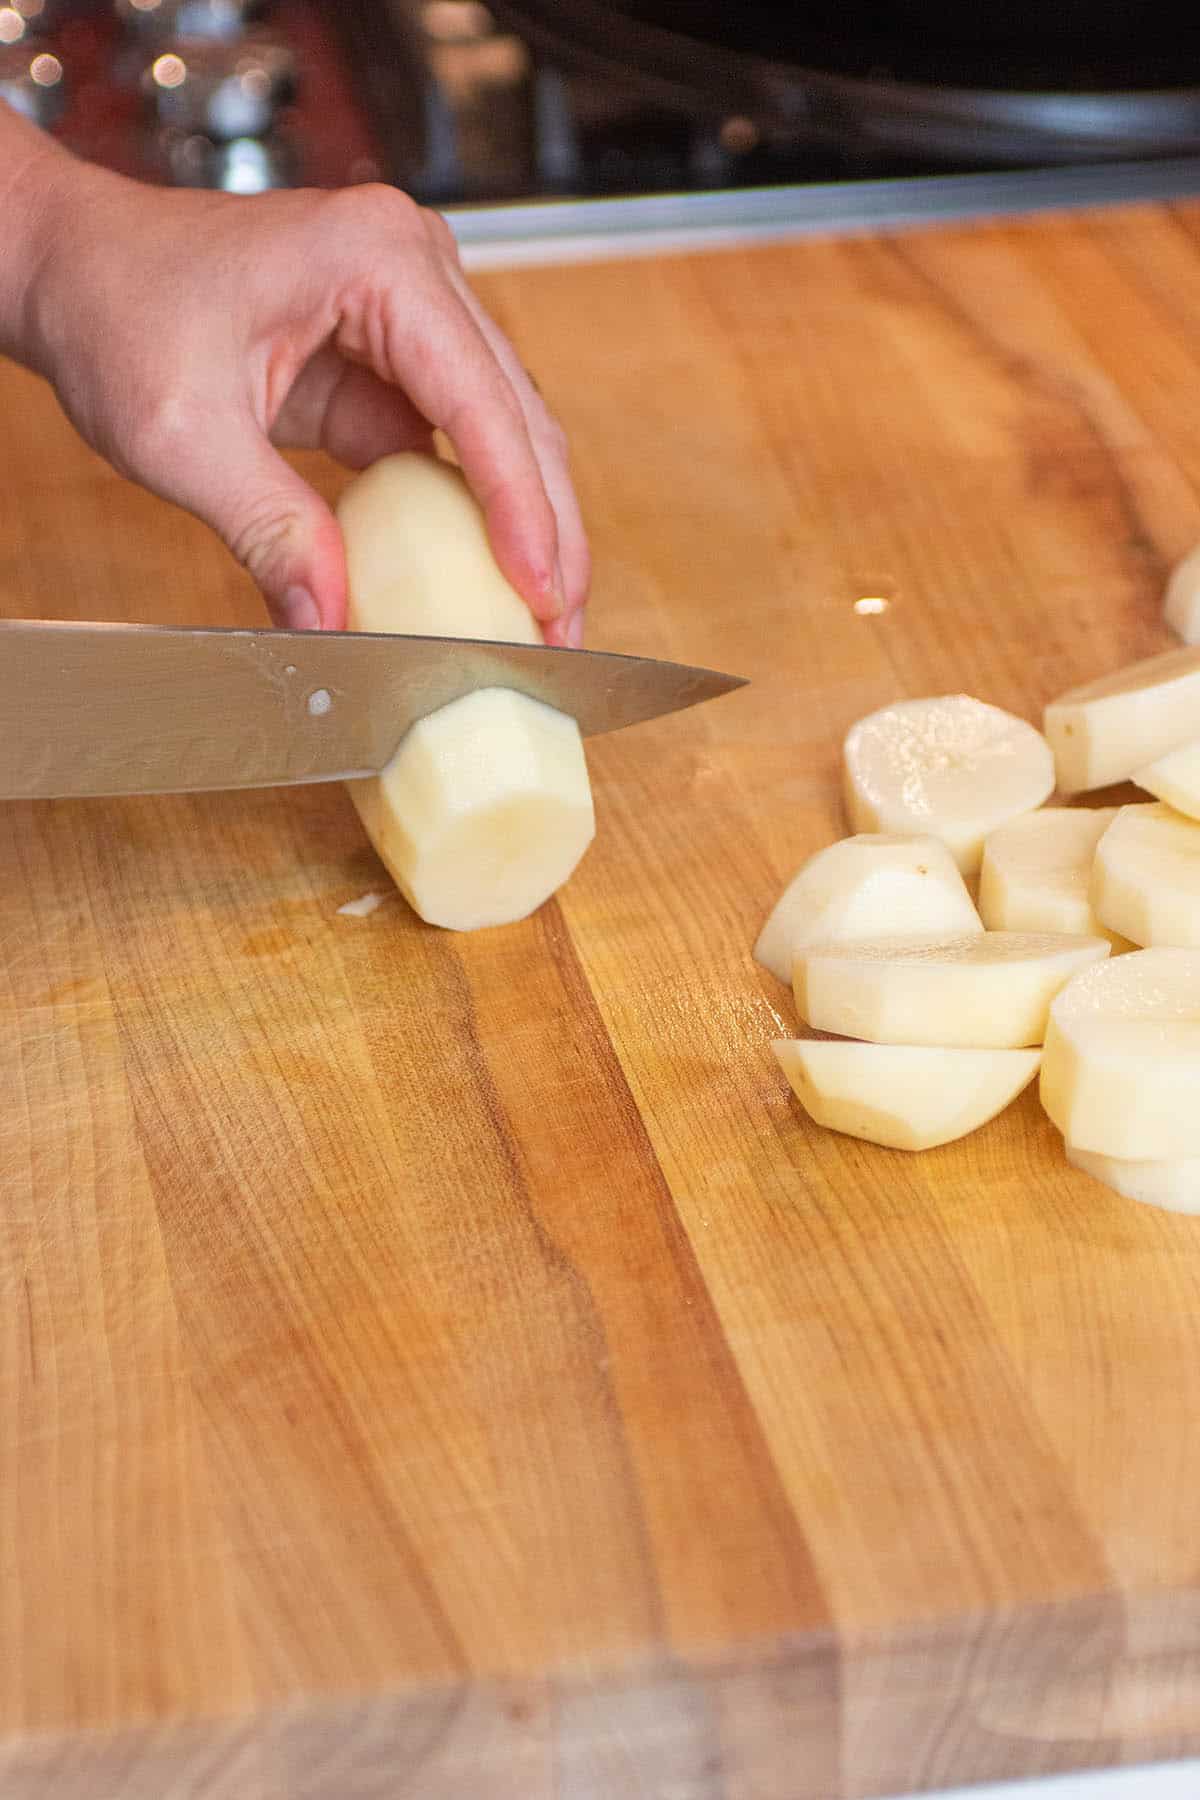 A cutting board with peeled potatoes being cut into pieces.